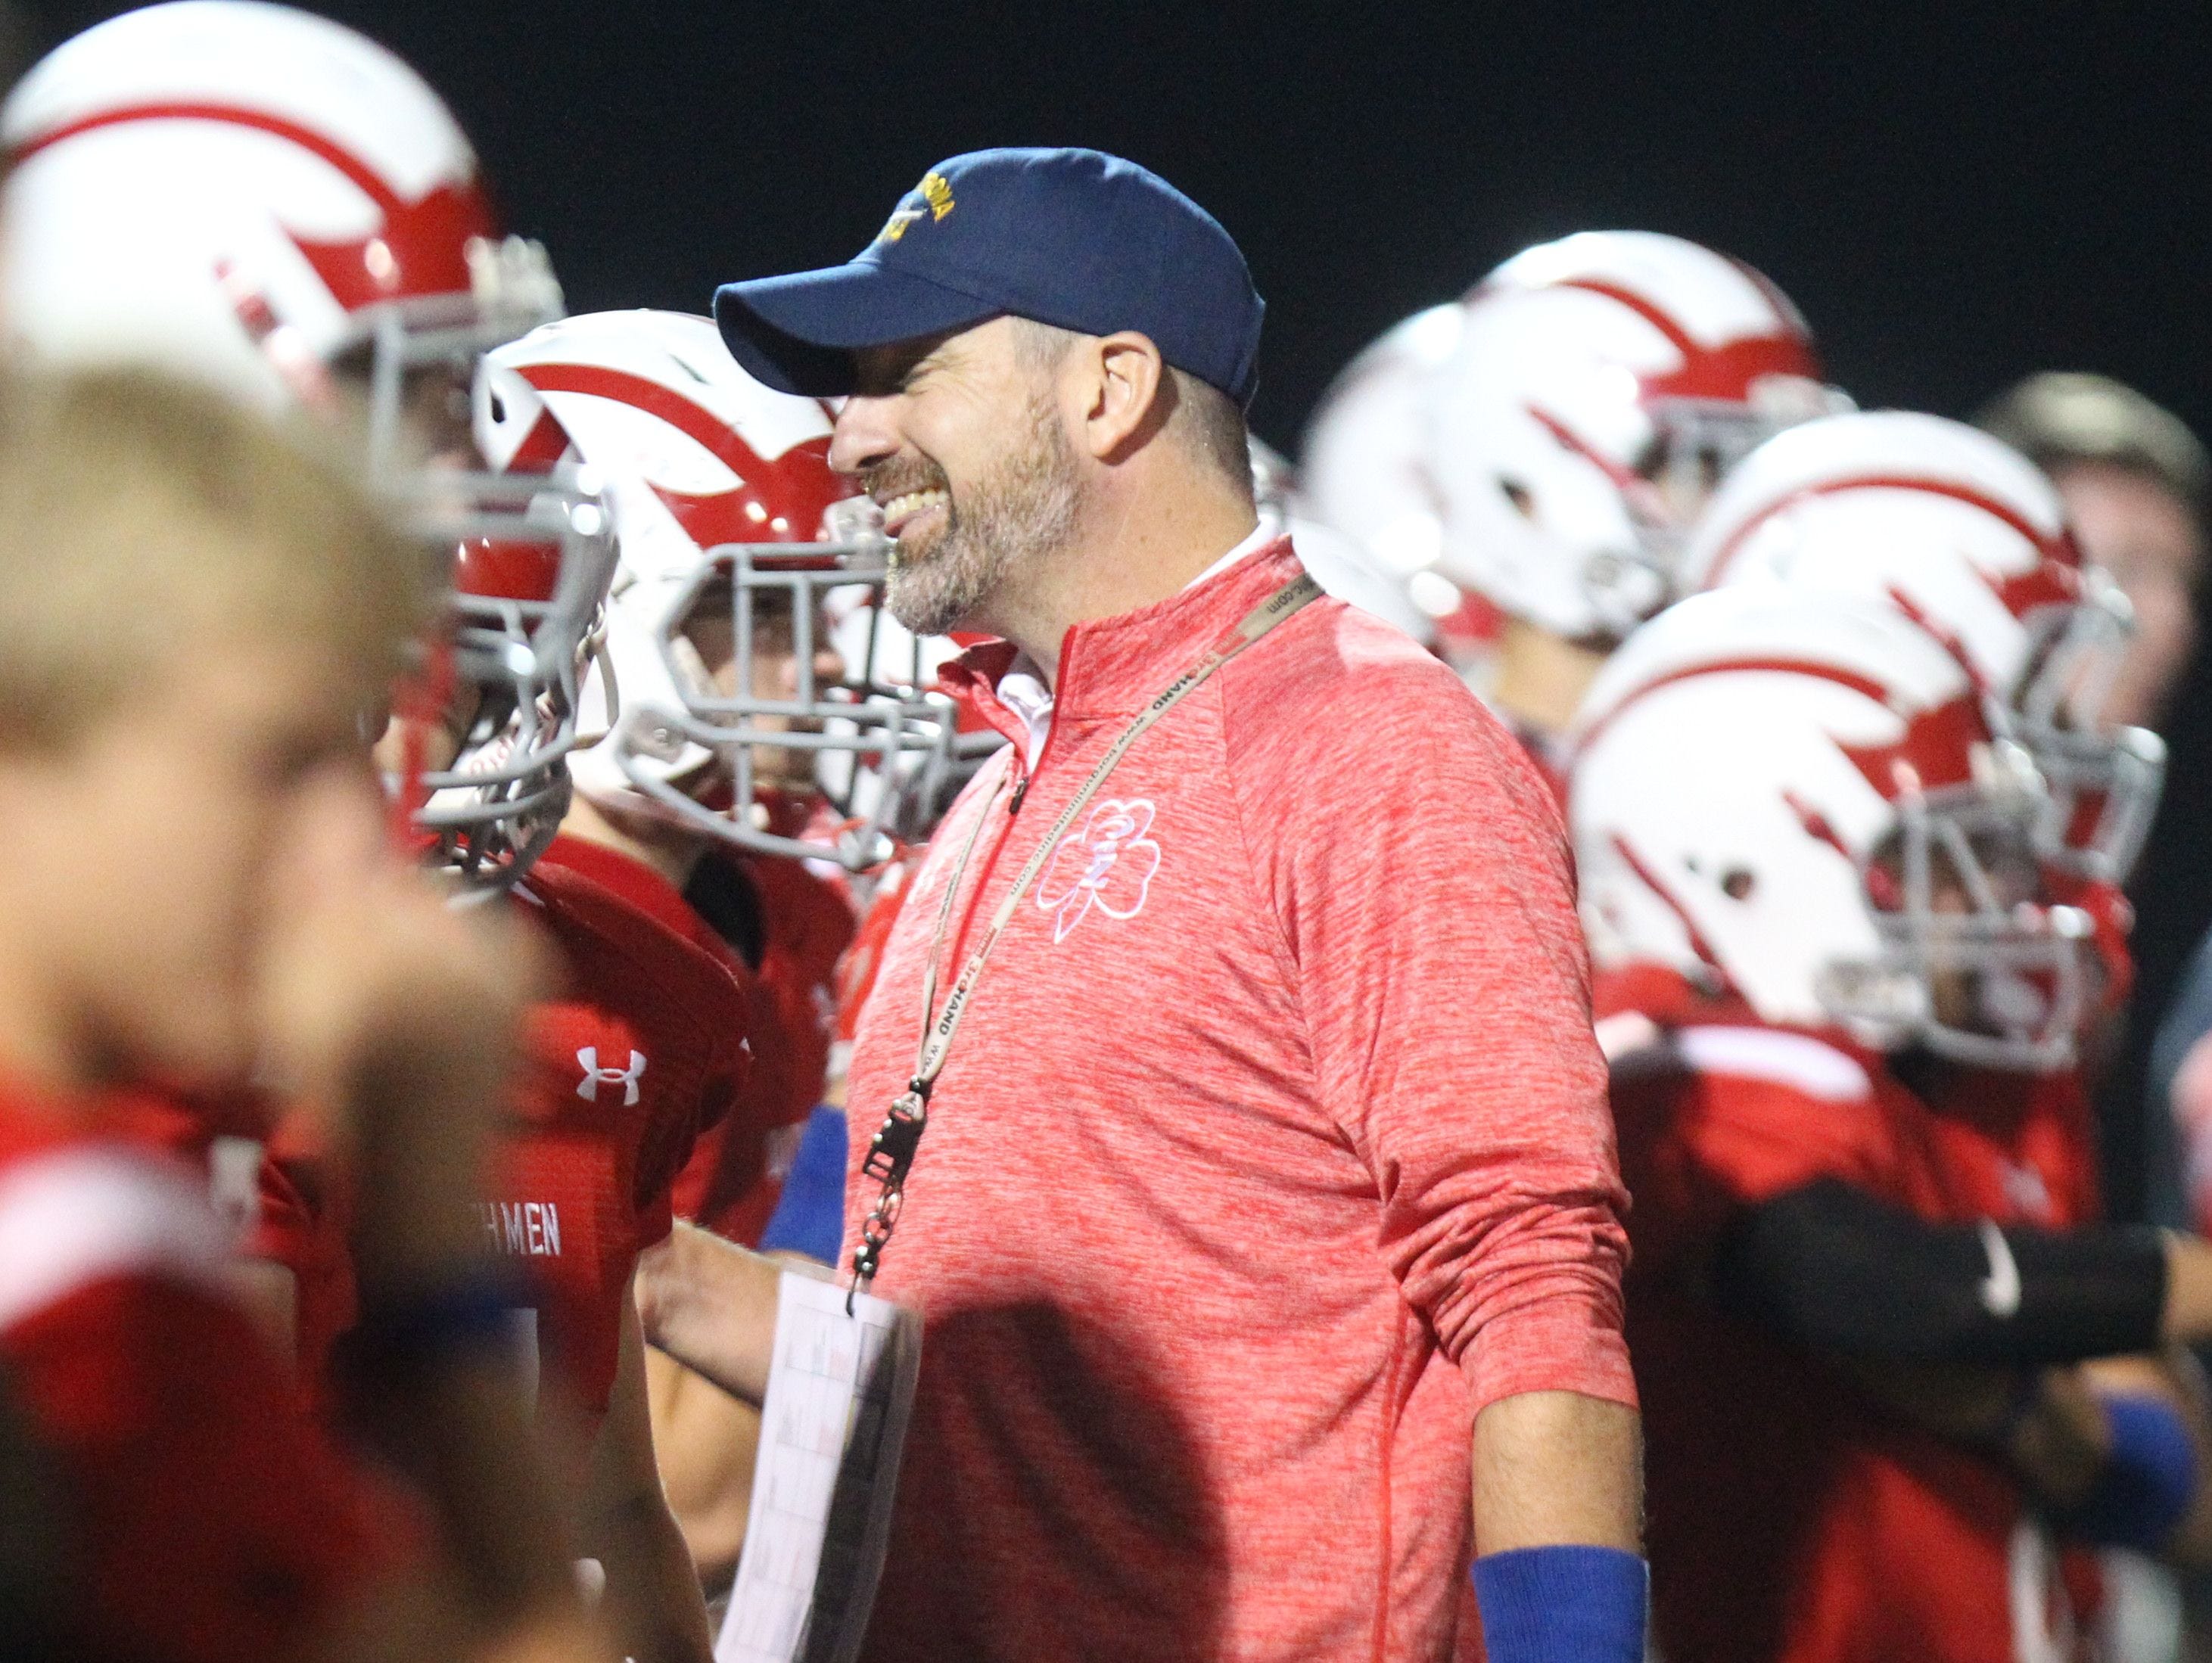 Tappan Zee football coach Andy DiDomenico smiles at his team as they beat Byram Hills 27-20 at Tappan Zee Oct. 9, 2015.